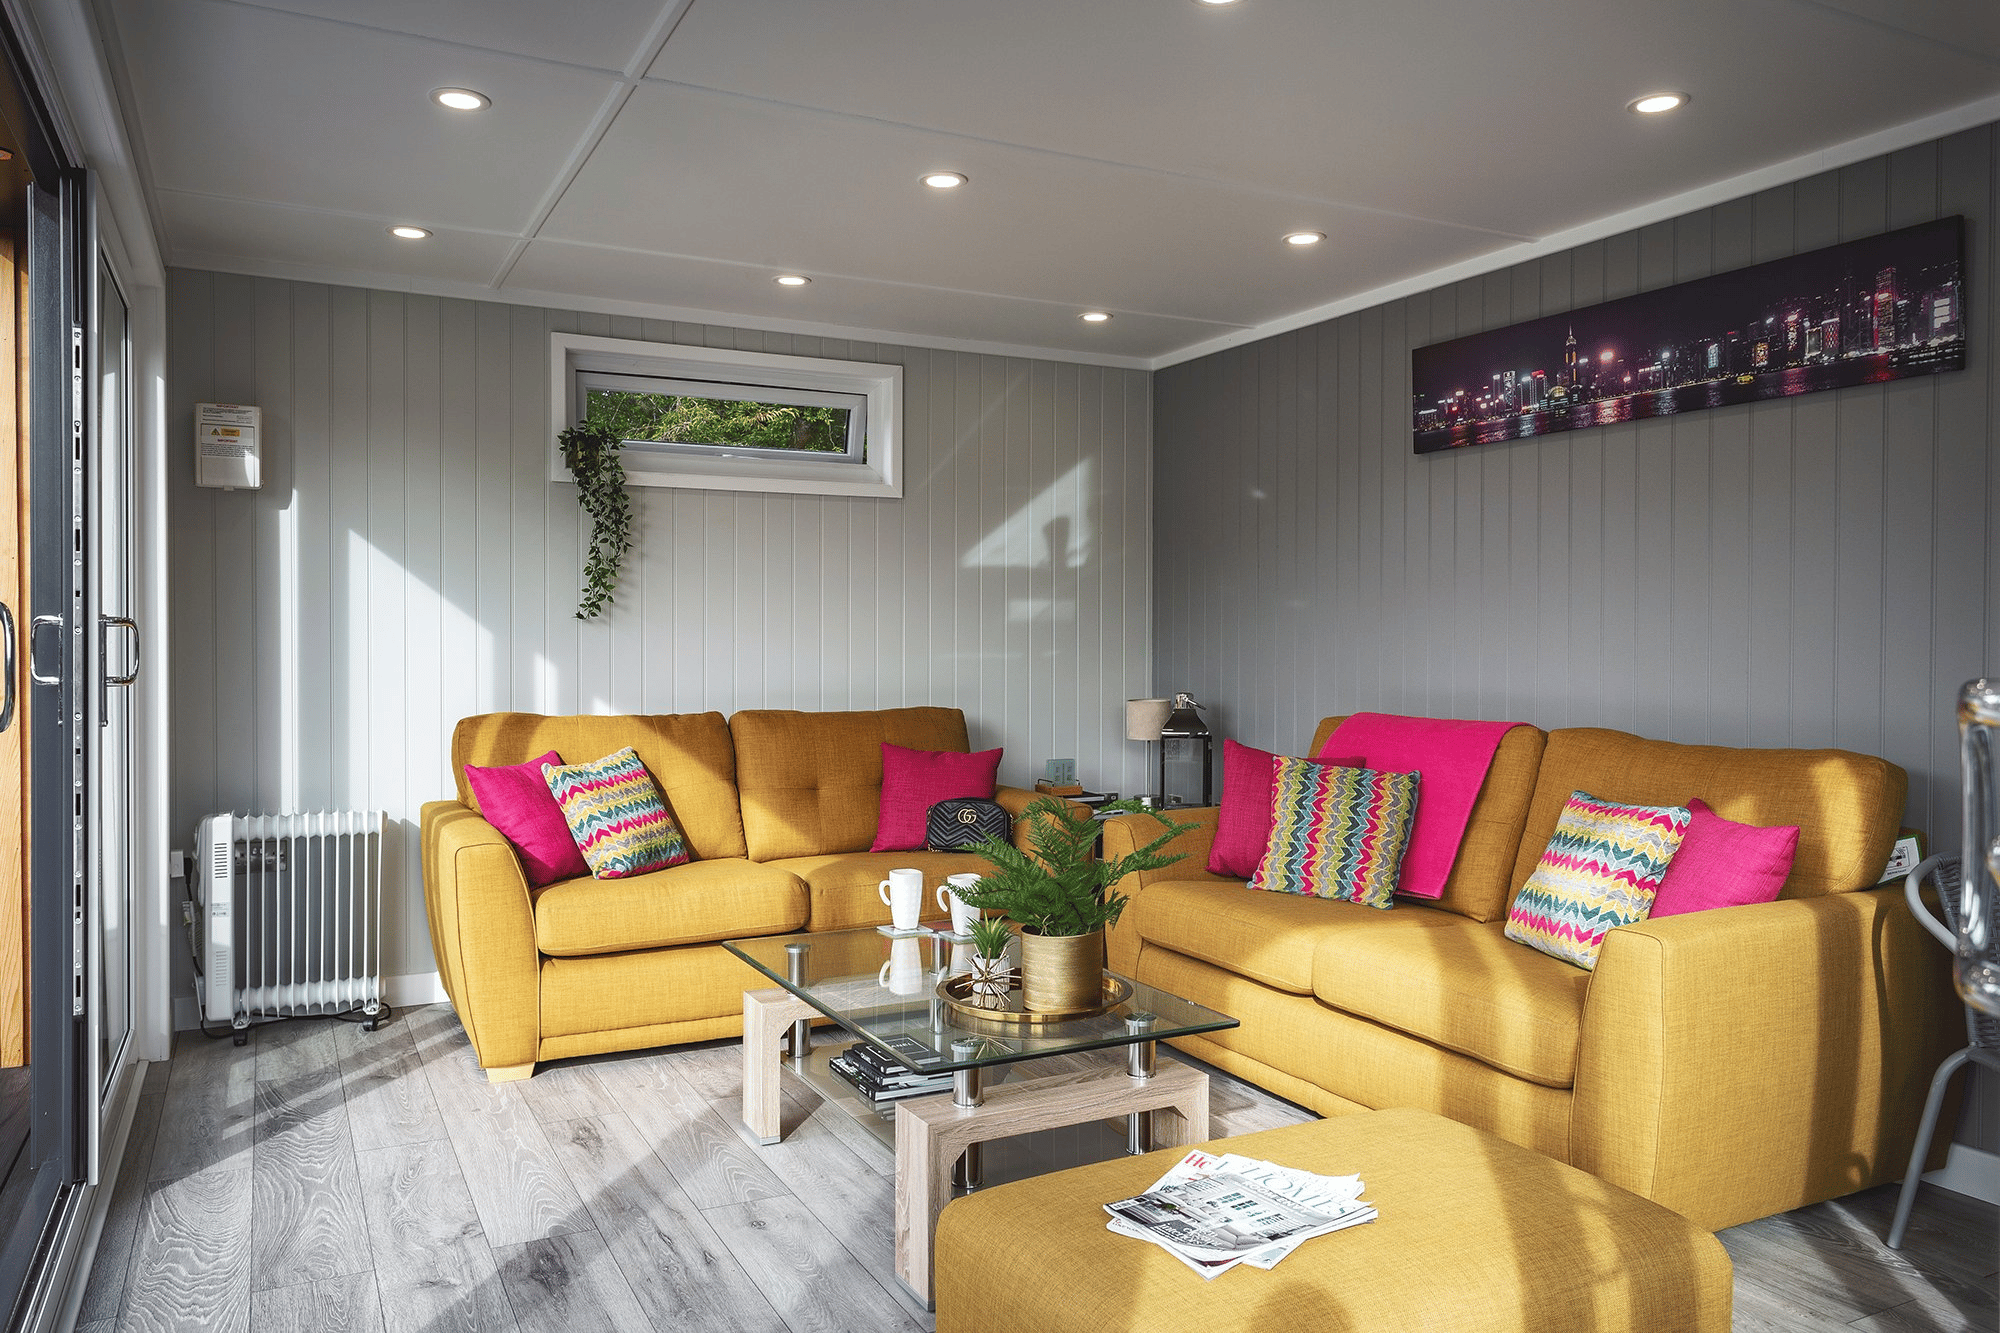 Inside of Garden Summerhouse with large yellow sofas and bright pink cushions with coffee table in the middle